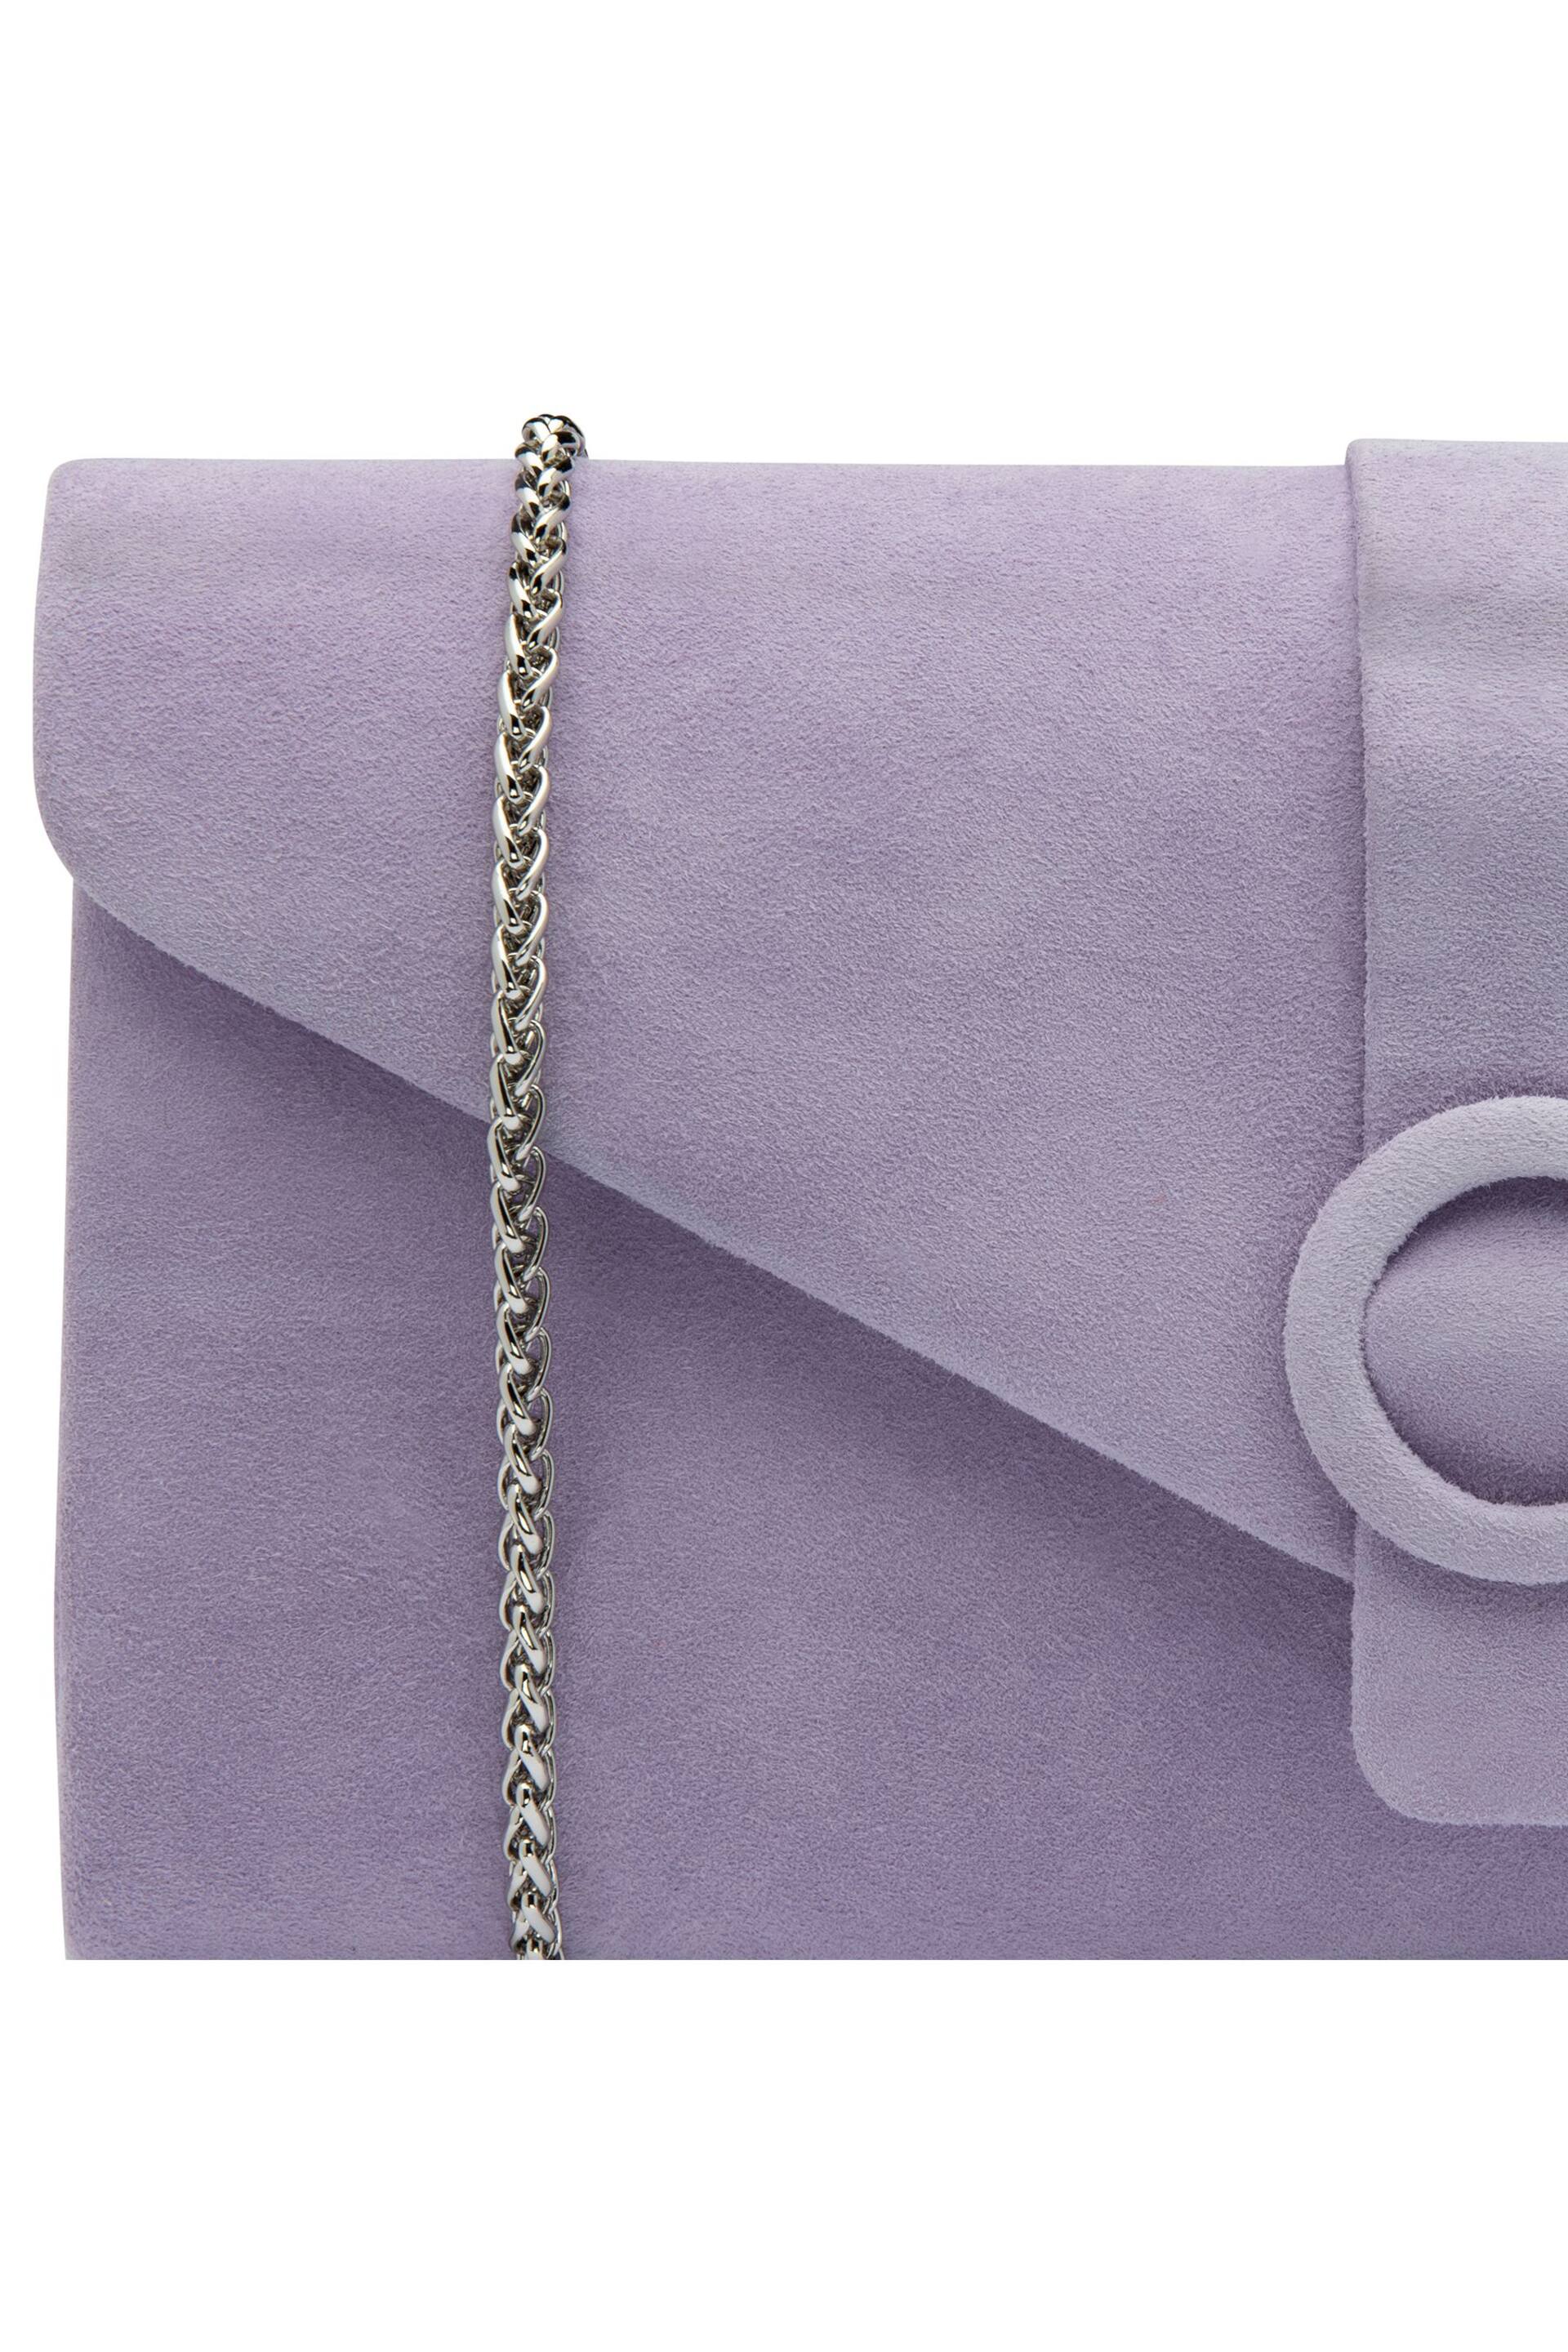 Lotus Purple Clutch Bag With Chain - Image 4 of 4